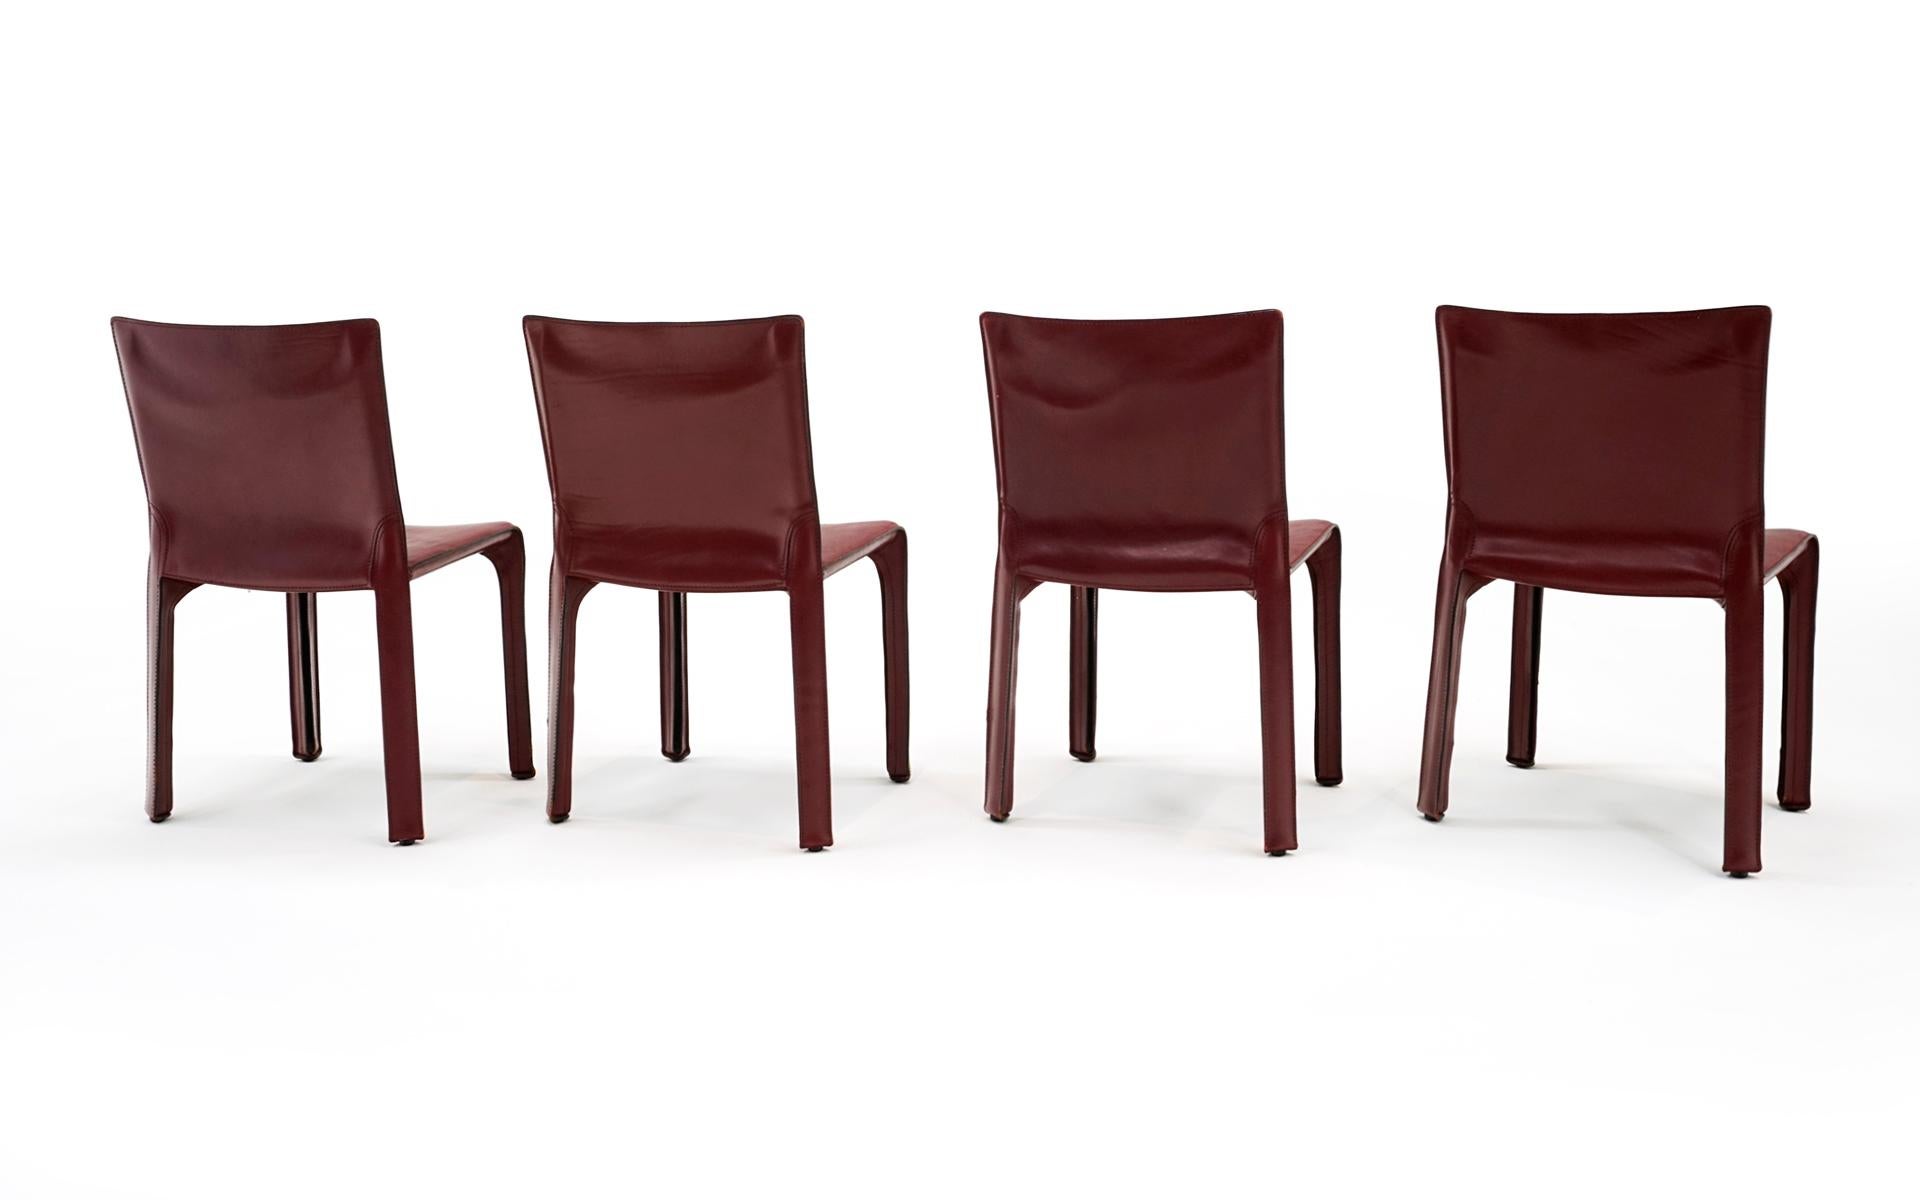 Late 20th Century Four Mario Bellini Cab Dining Chairs in Oxblood Leather.  Model 412 for Cassina